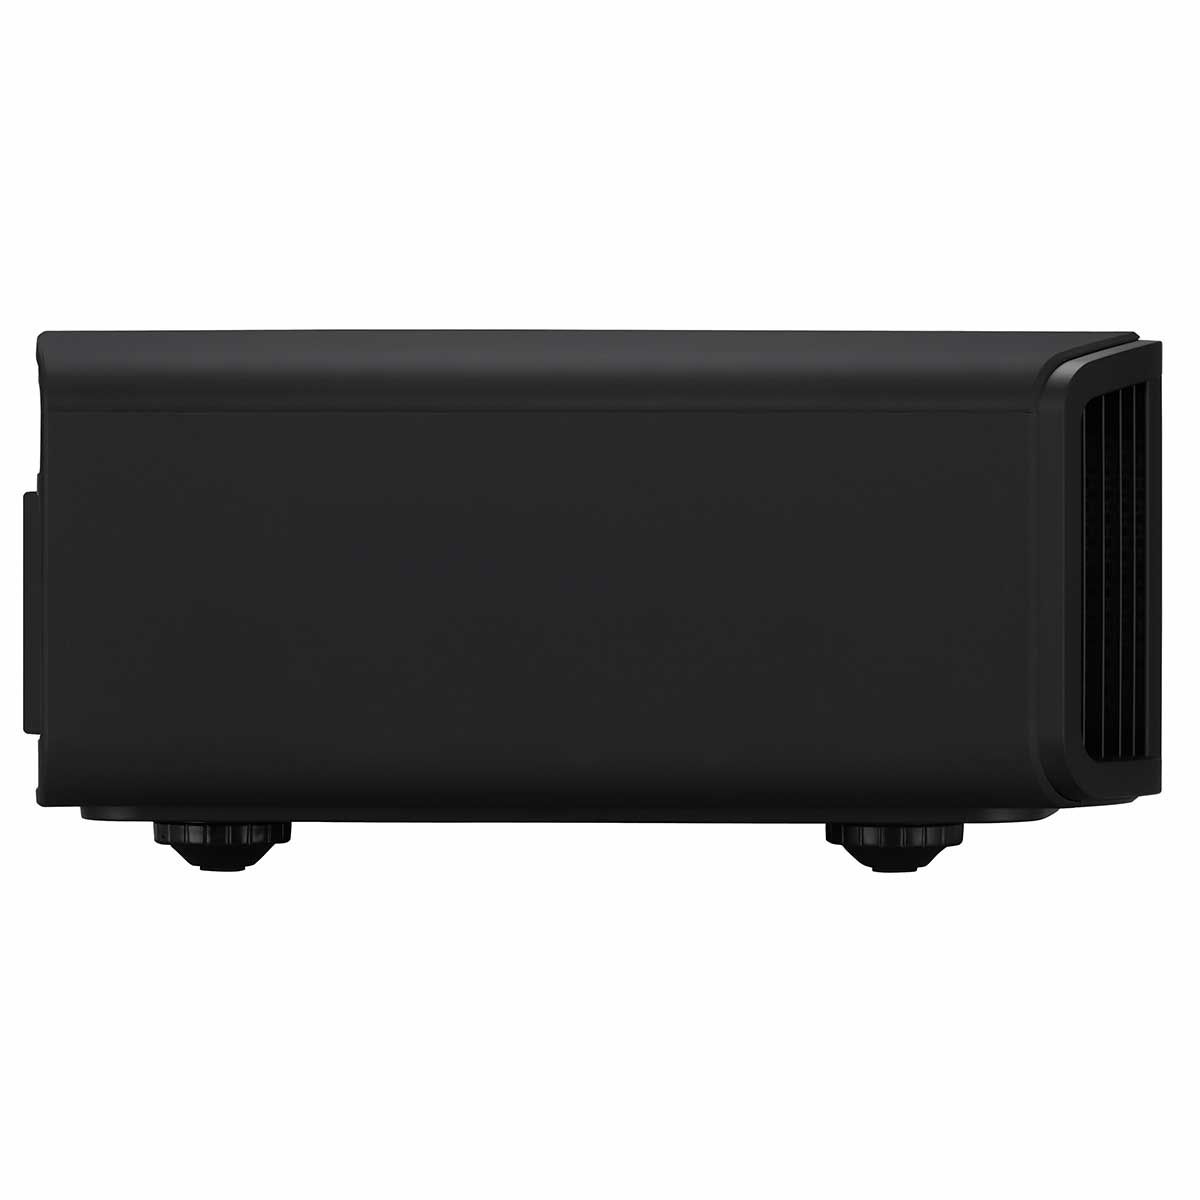 JVC DLA-NZ800 8K Home Theater Projector side view